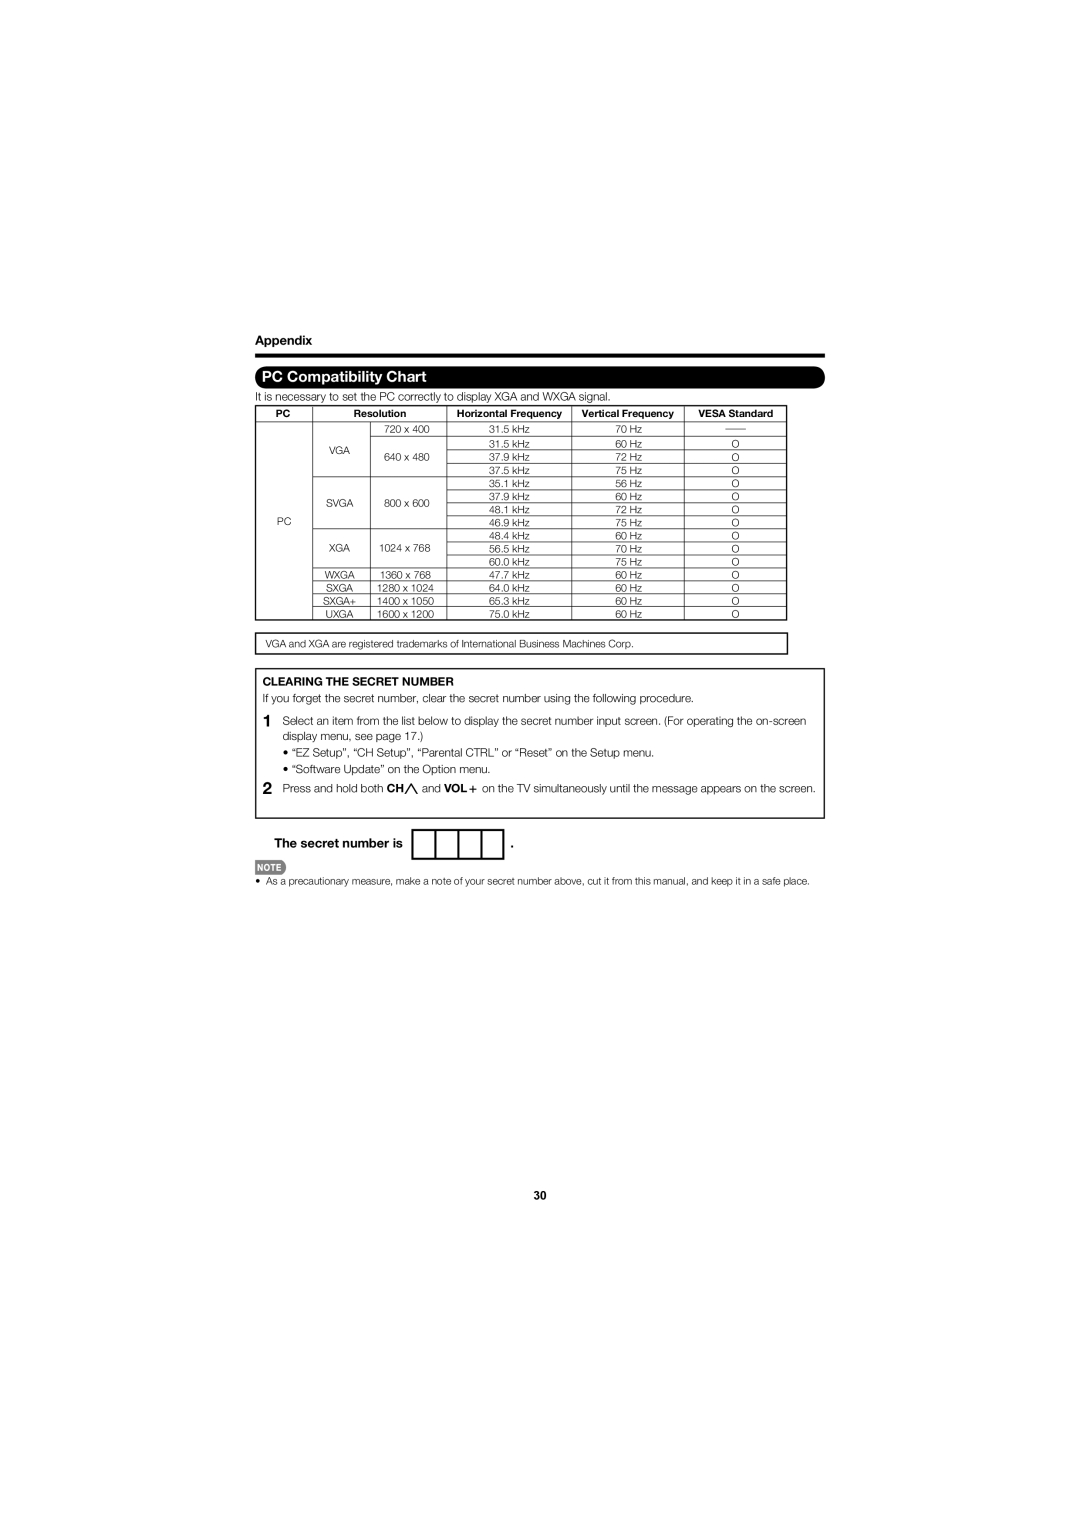 Sharp LC-40D68UT operation manual PC Compatibility Chart, Secret number is 